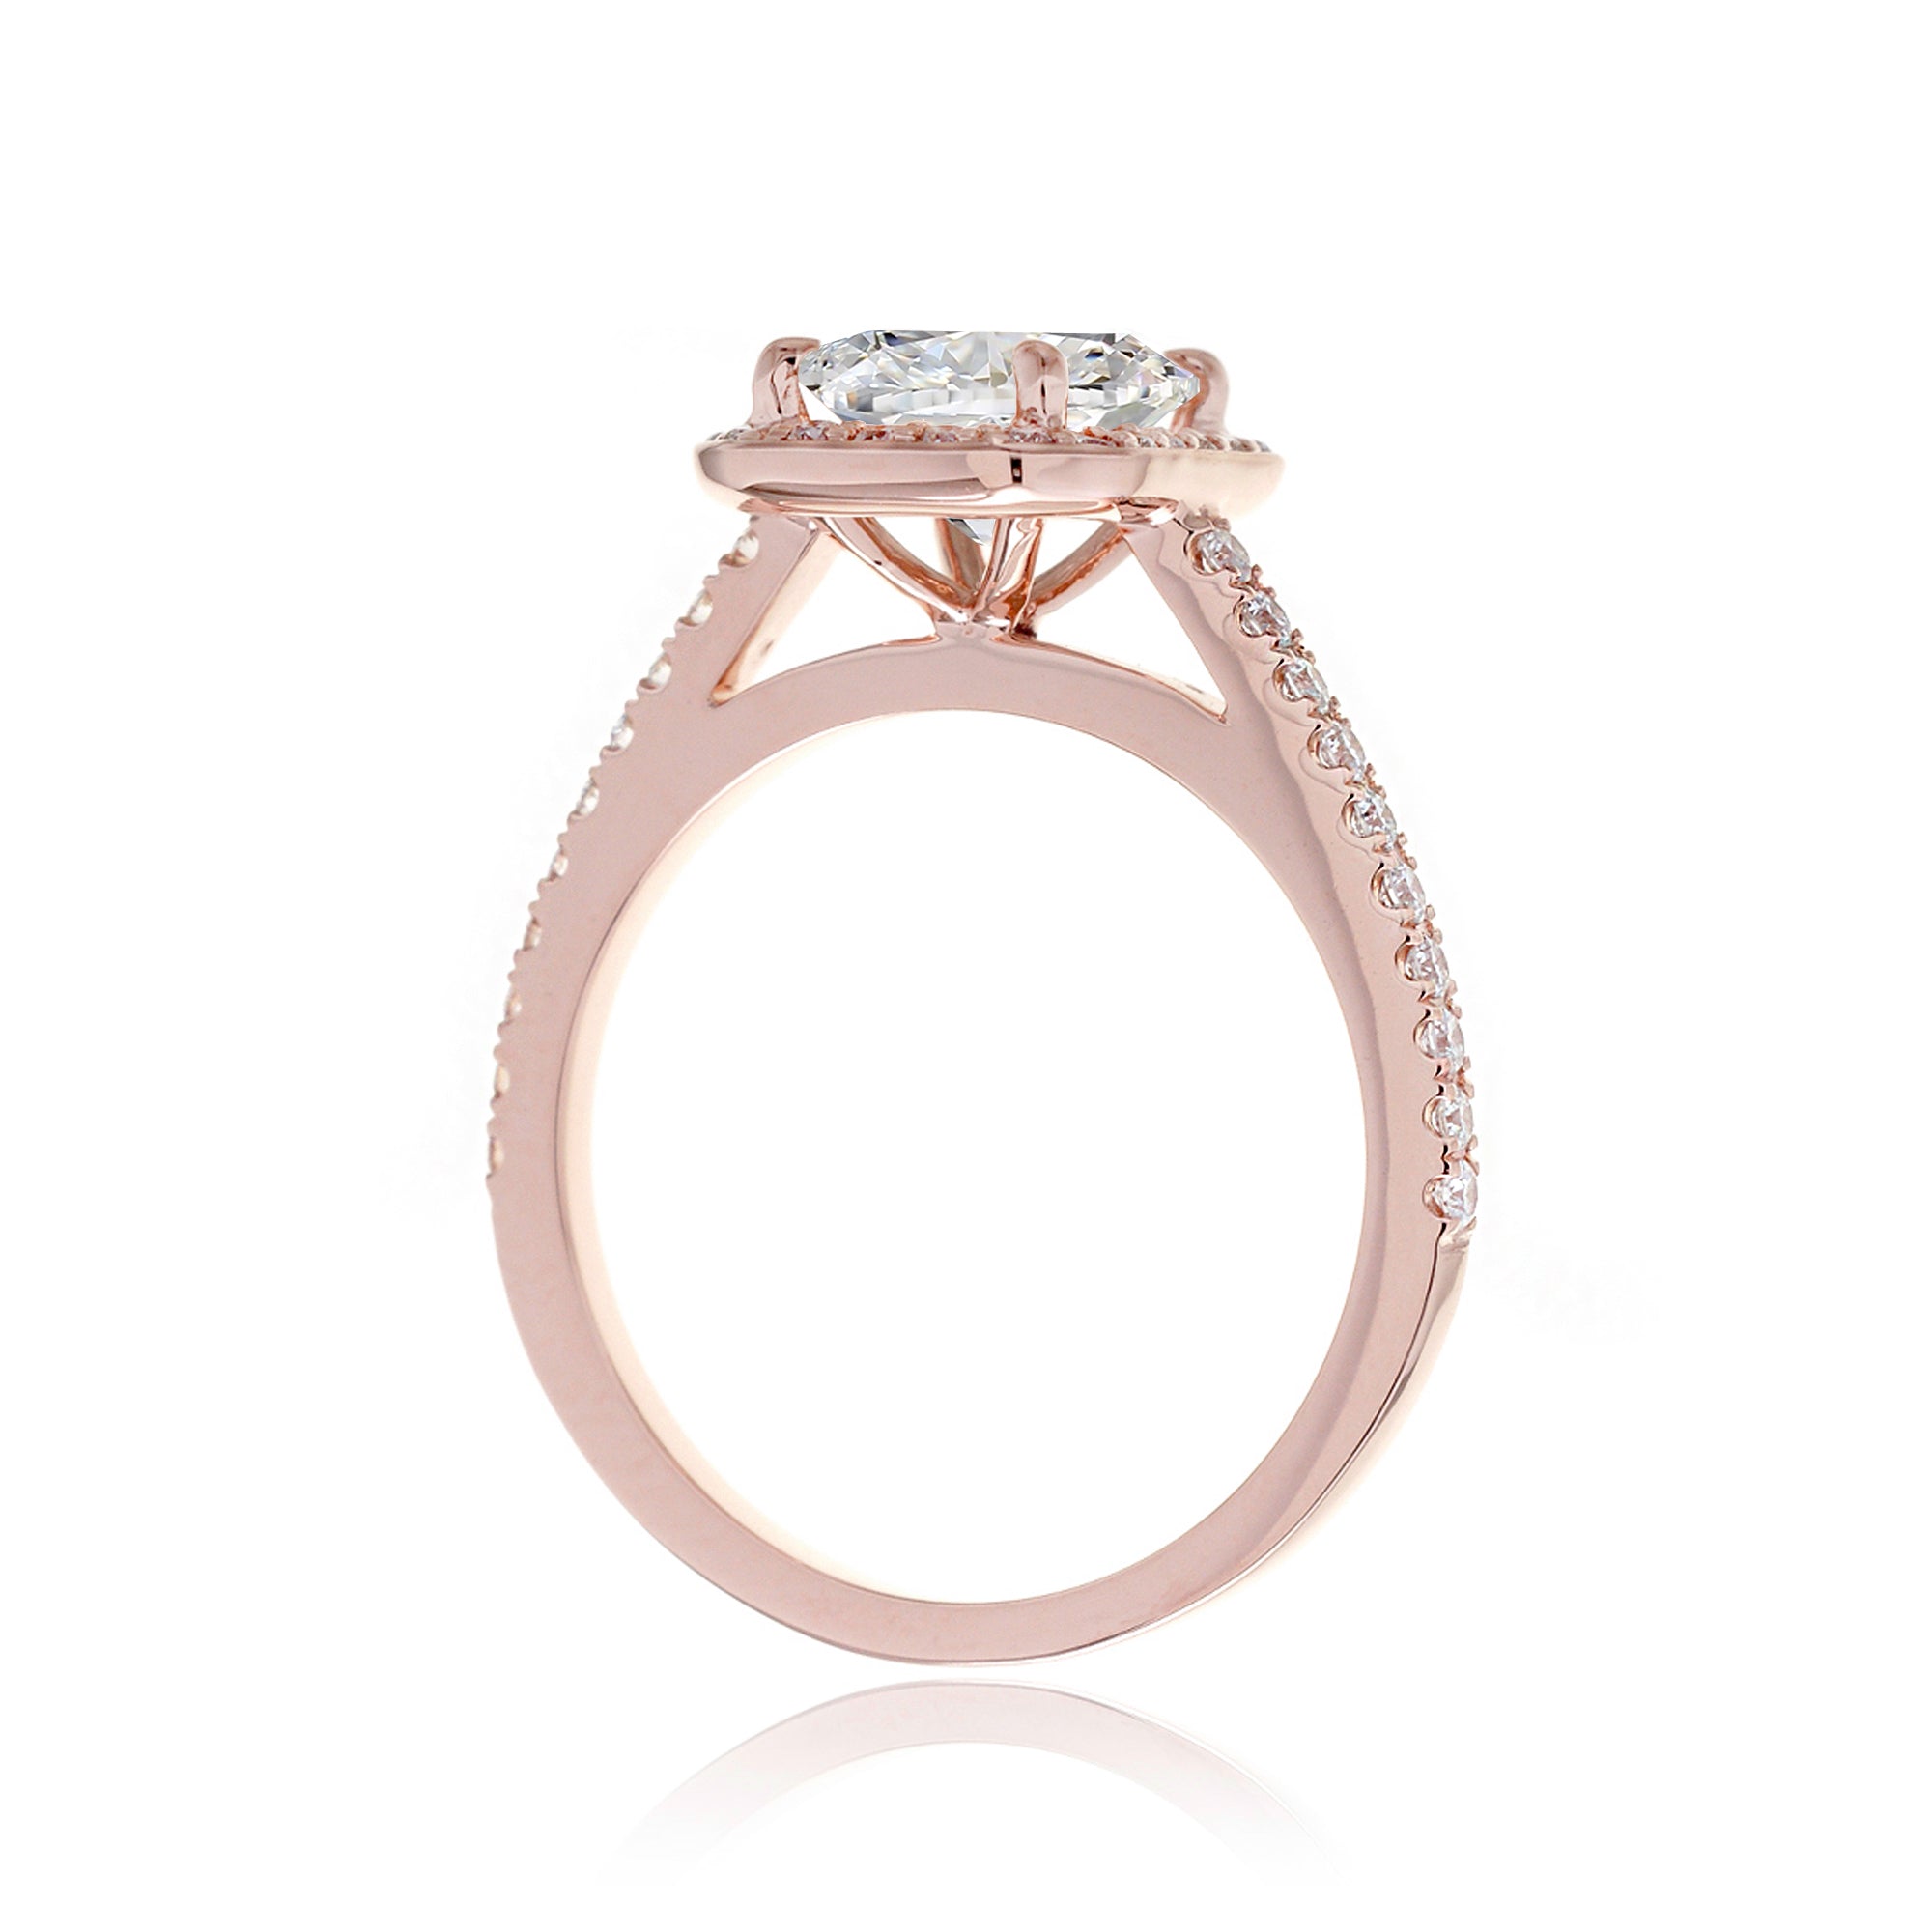 Cushion lab-grown diamond halo cathedral engagement ring - the Steffy rose gold